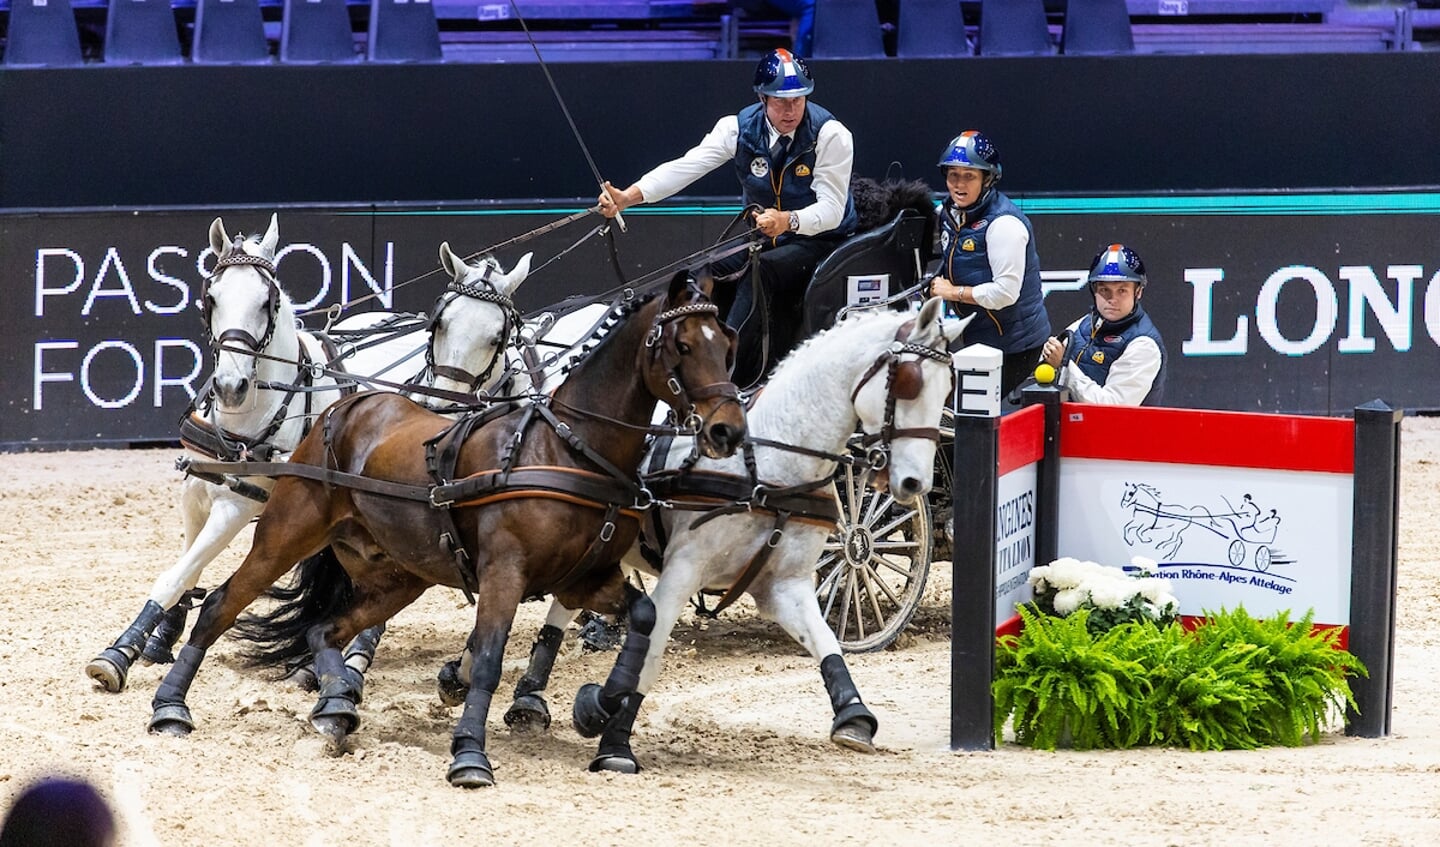 Koos de Ronde (NED) with on the carriage Marie de Ronde Oudemans and Martin Beenhakker
Horses 5A 178. Maestoso Zenta XI 8, 5B Favory Allegra Futter, 5C Favory Mokany, 5E Tjibbe
FEI Driving World Cup Lyon 2022
© DigiShots